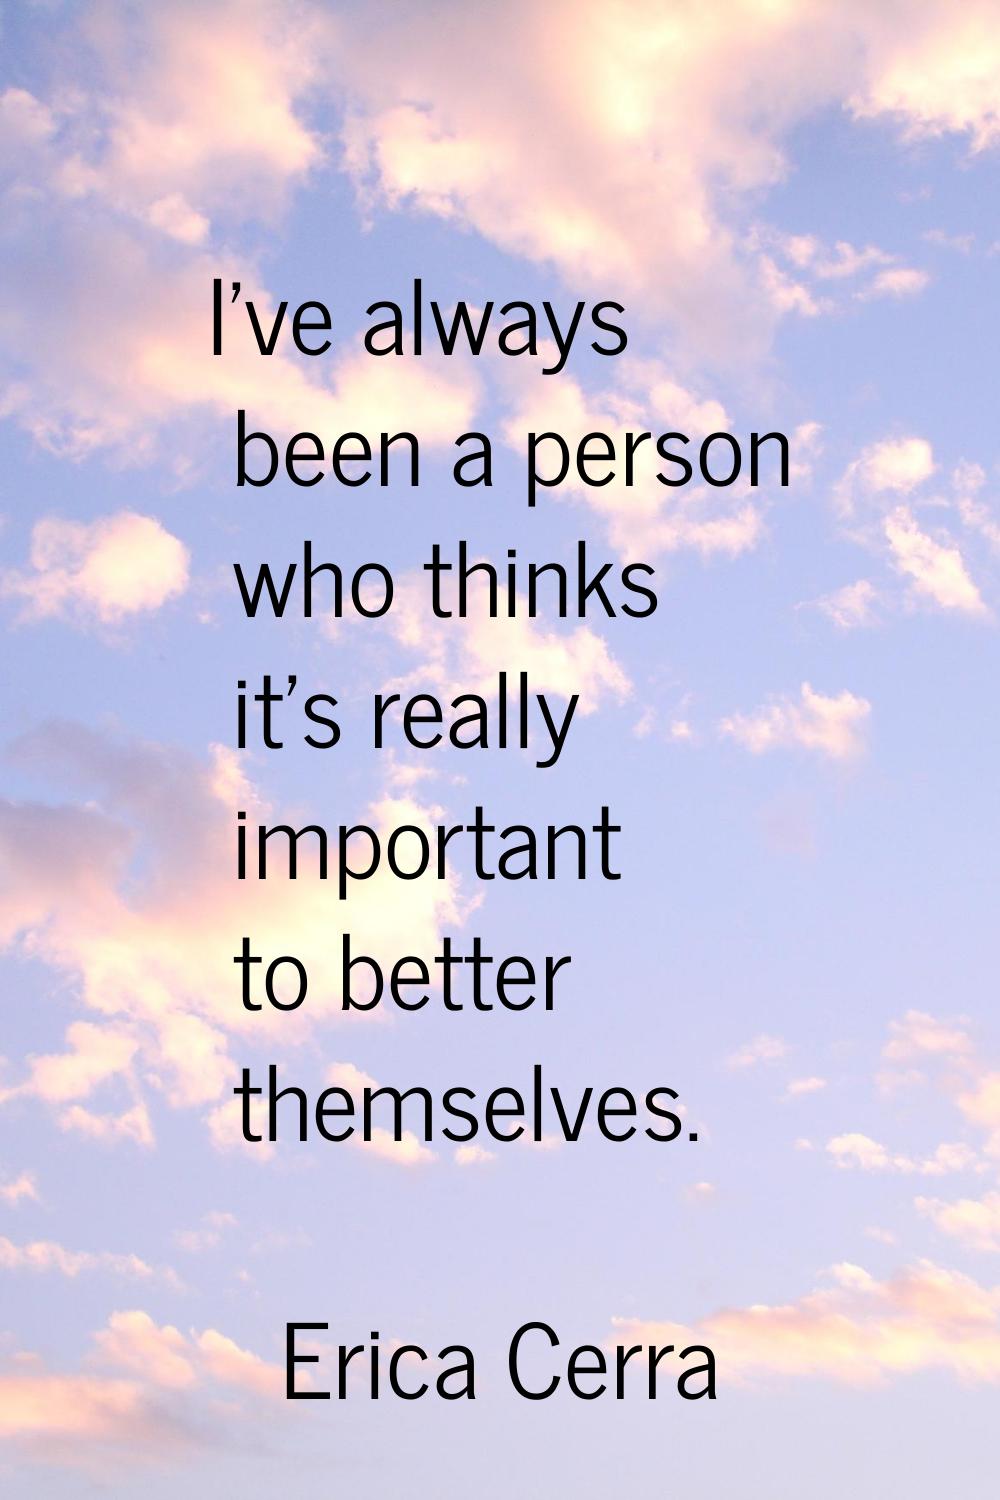 I've always been a person who thinks it's really important to better themselves.